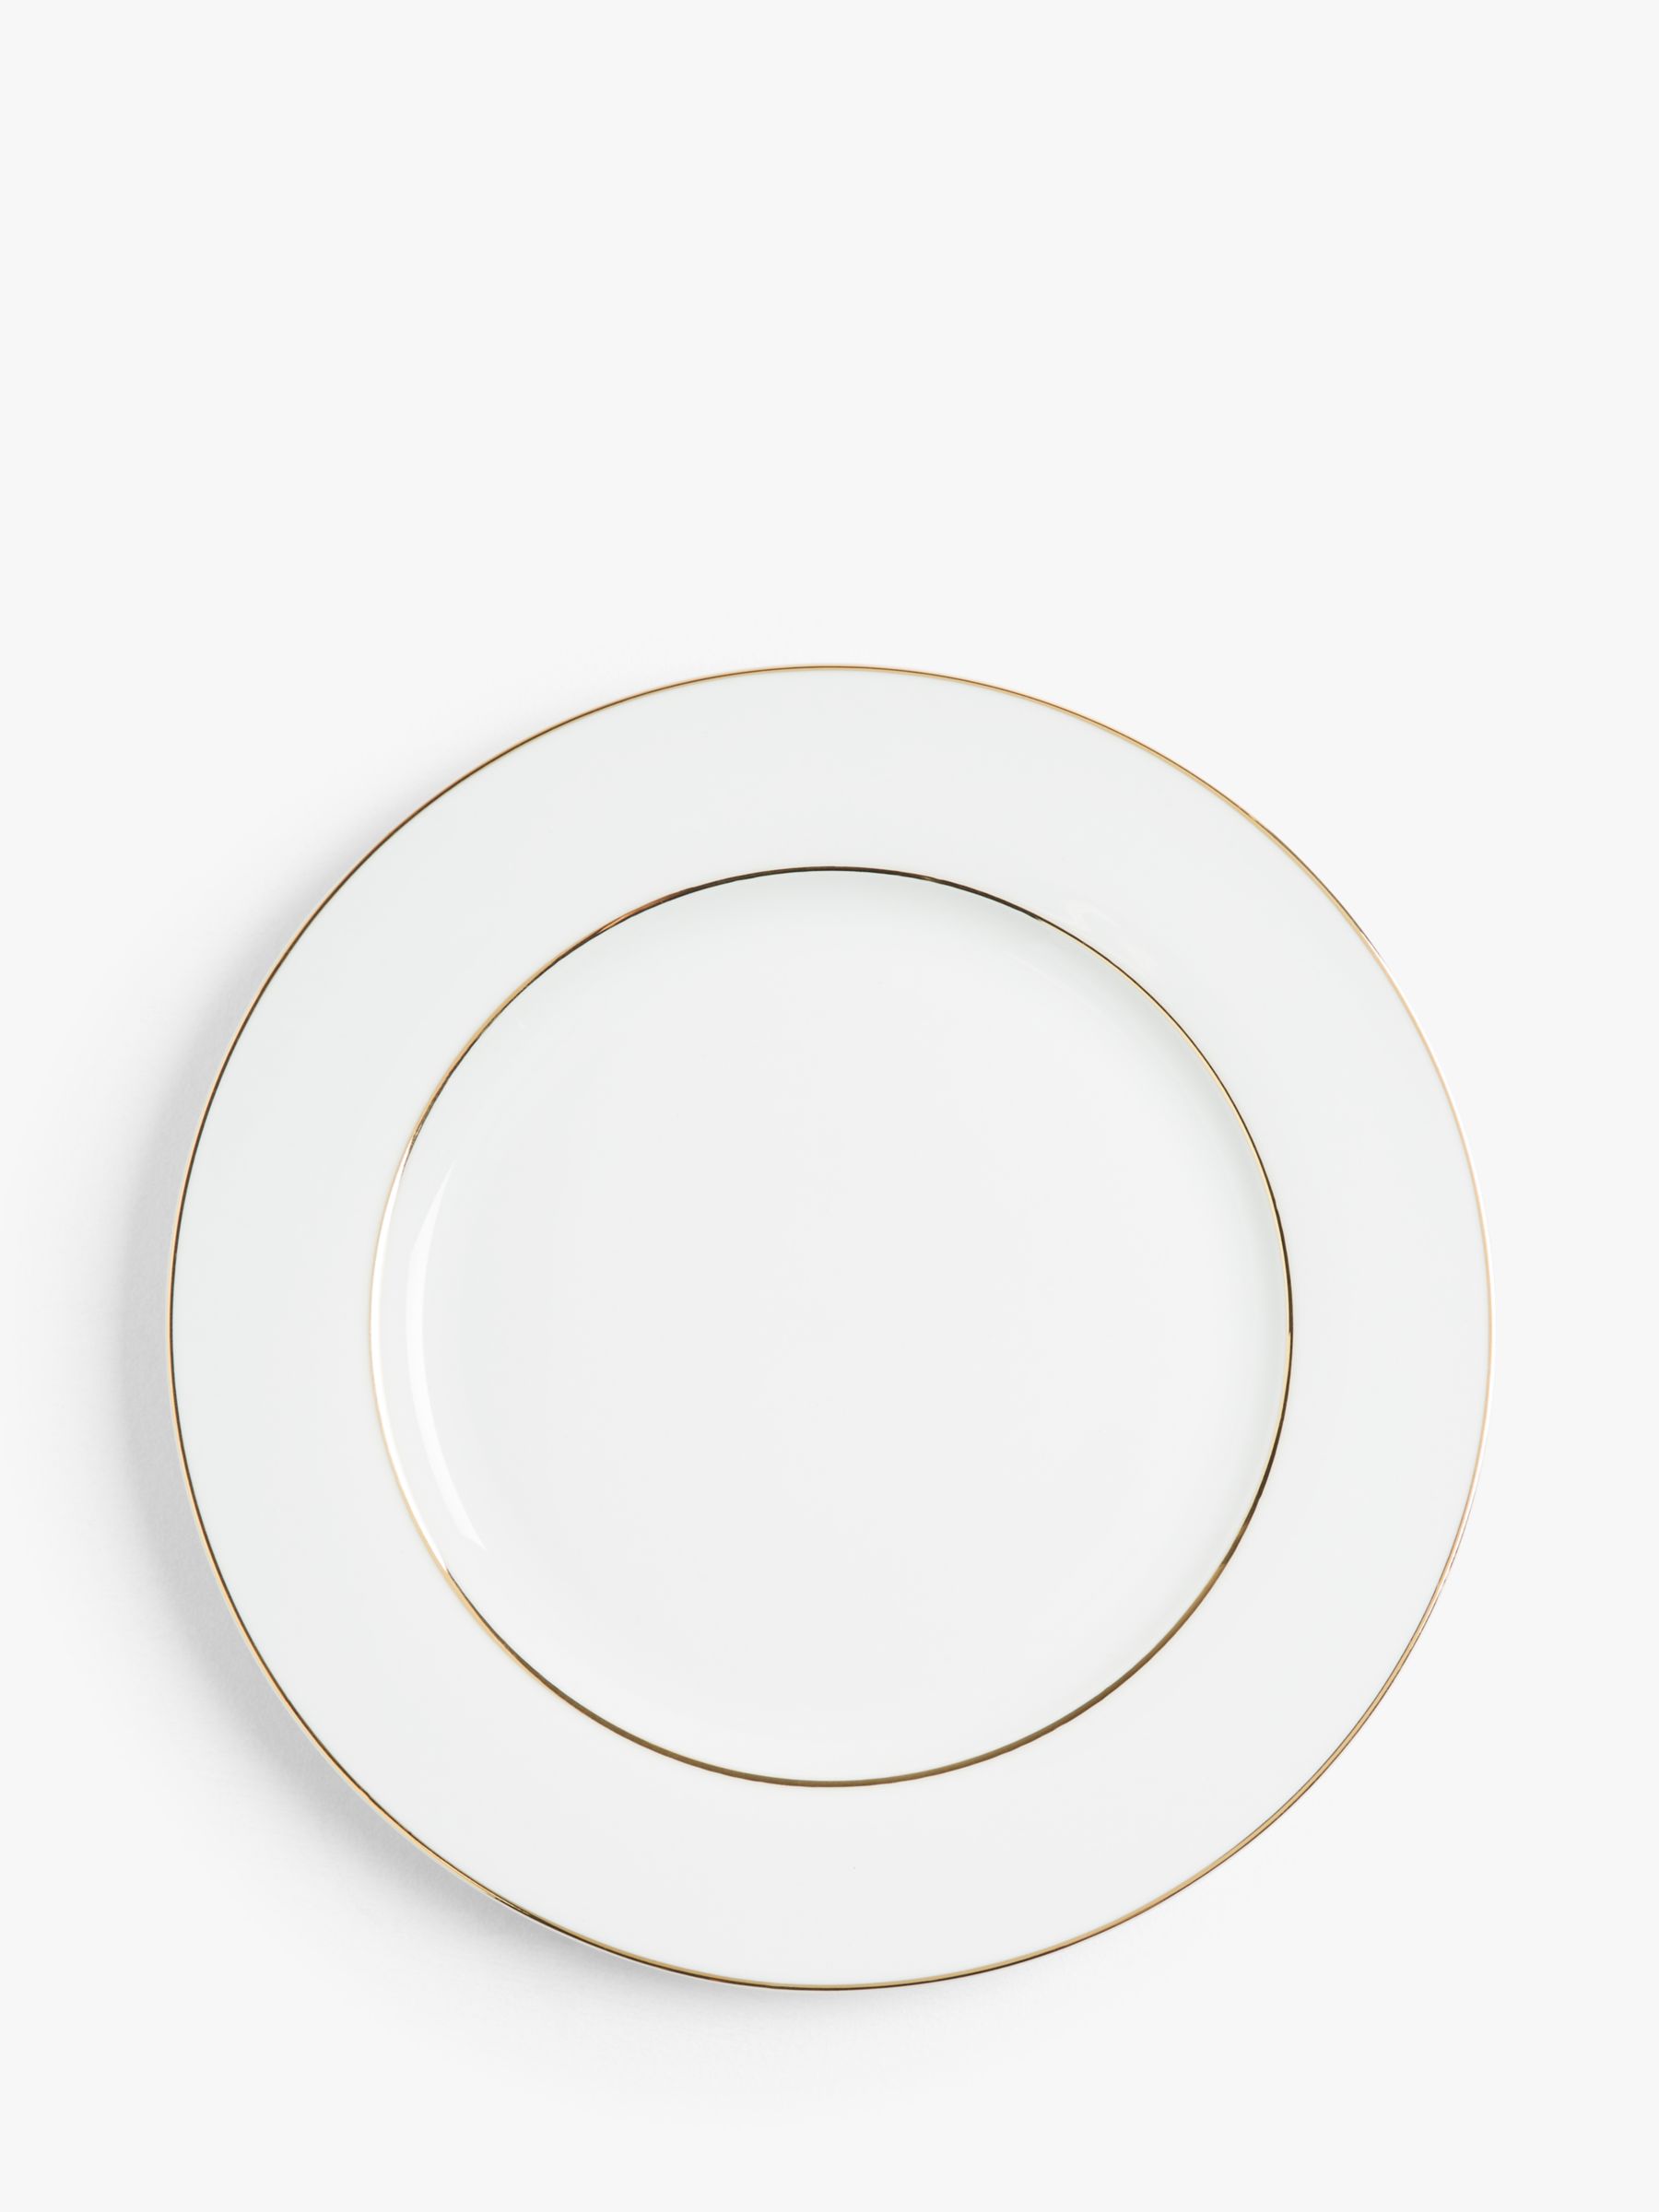 John Lewis & Partners Palazzo Gold Band Dinner Plate, 27.5cm, White/Gold